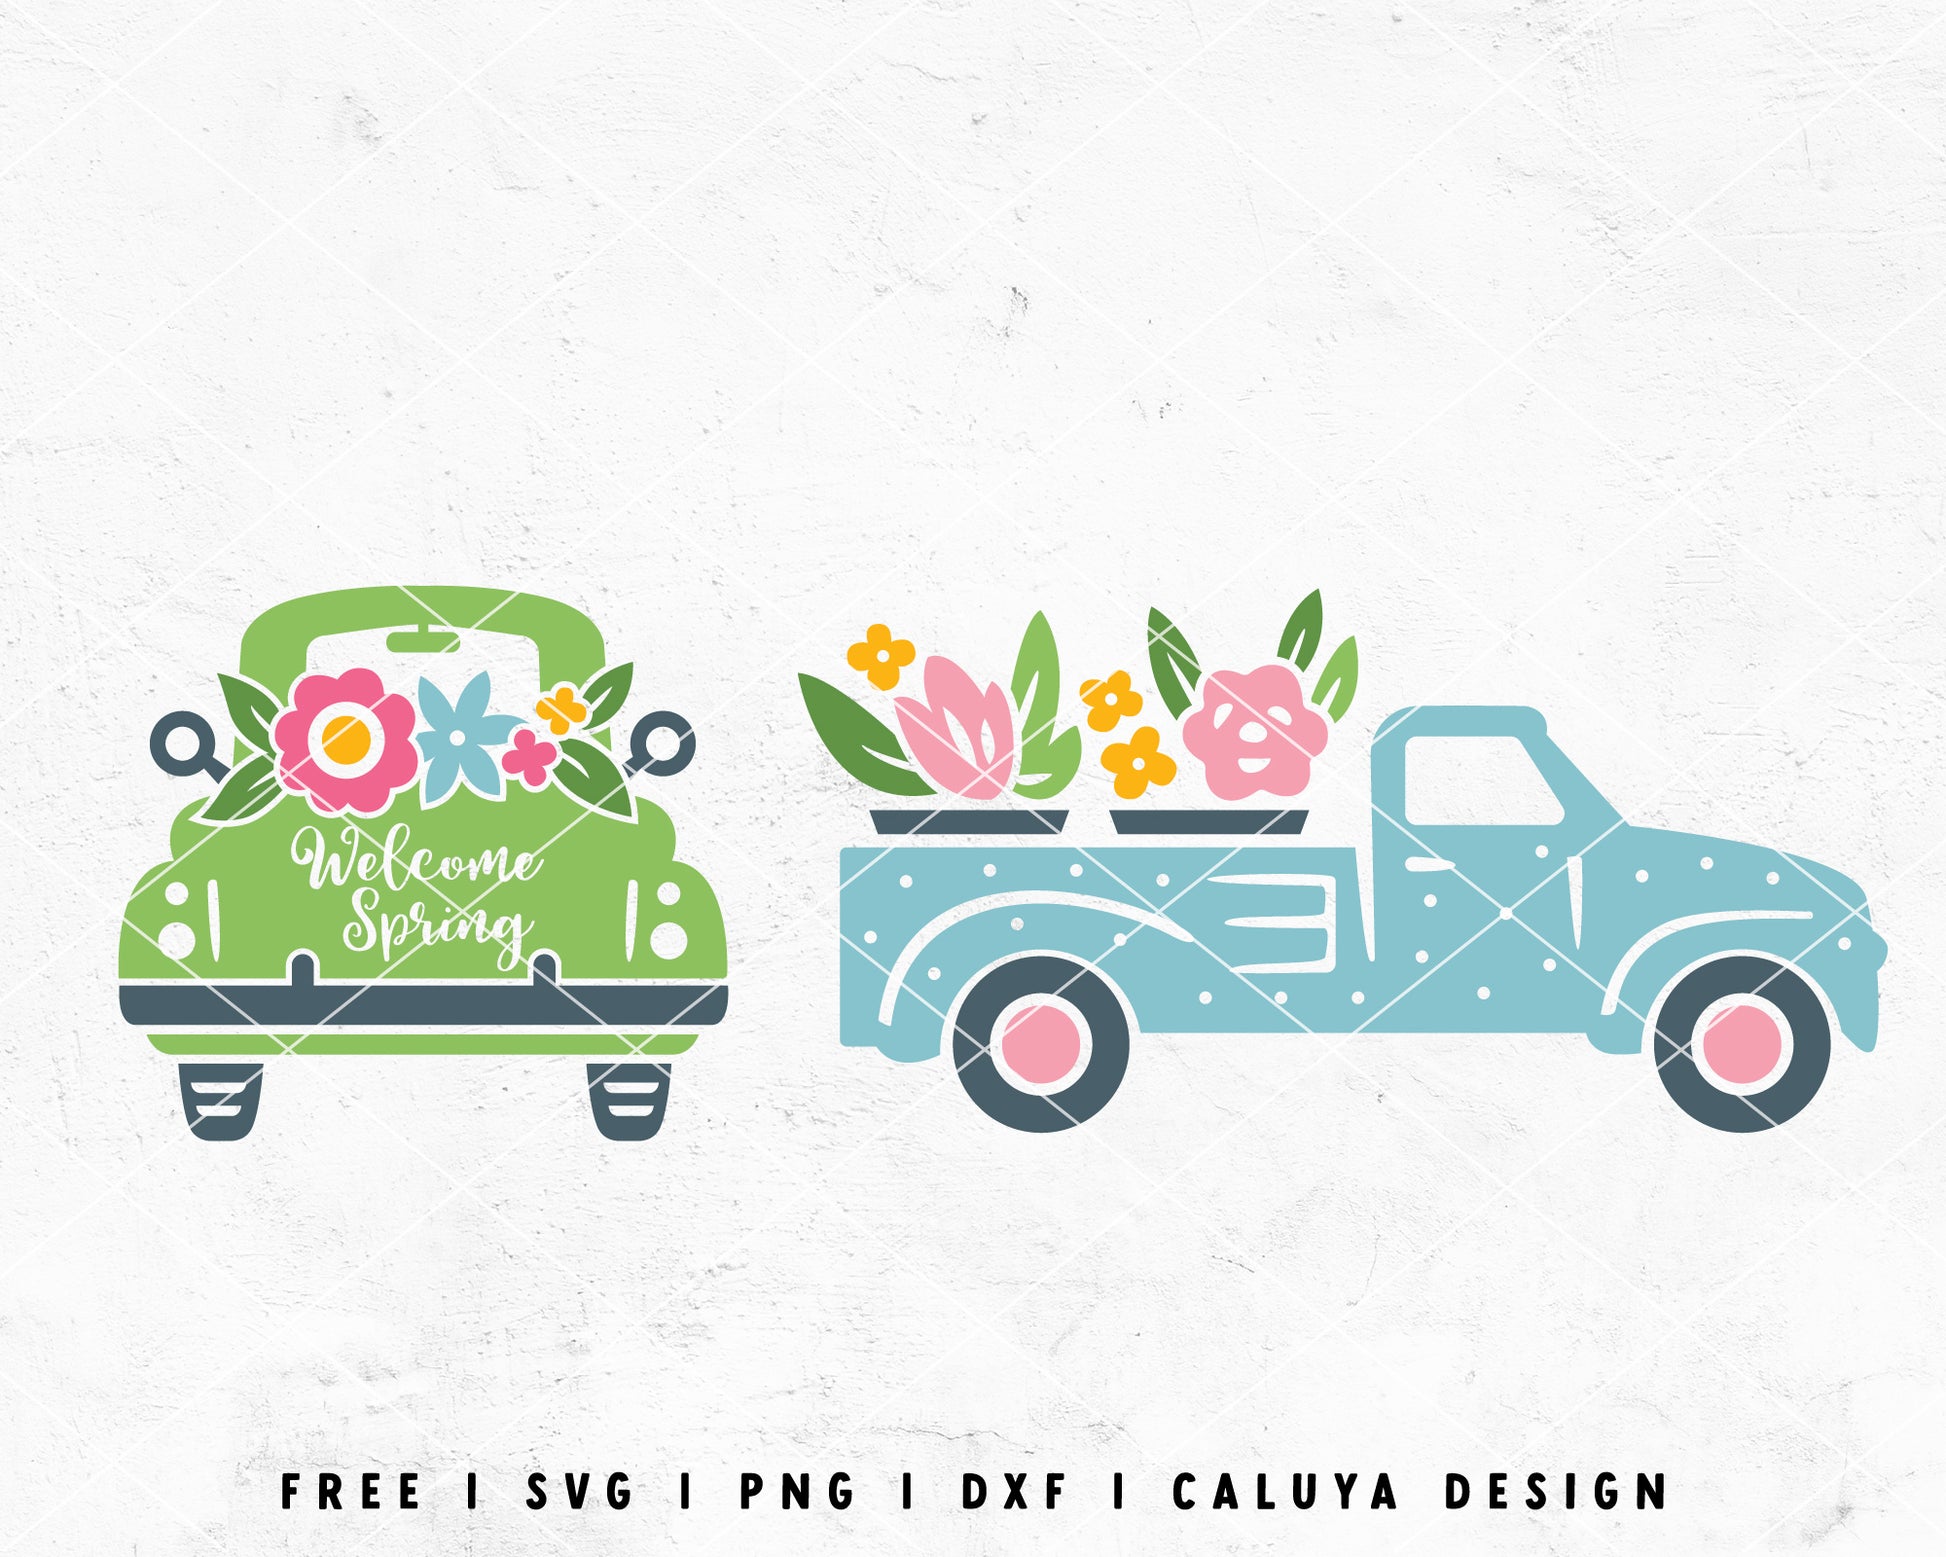 FREE Vintage Truck SVG | Spring Floral SVG Cut File for Cricut, Cameo Silhouette | Free SVG Cut File